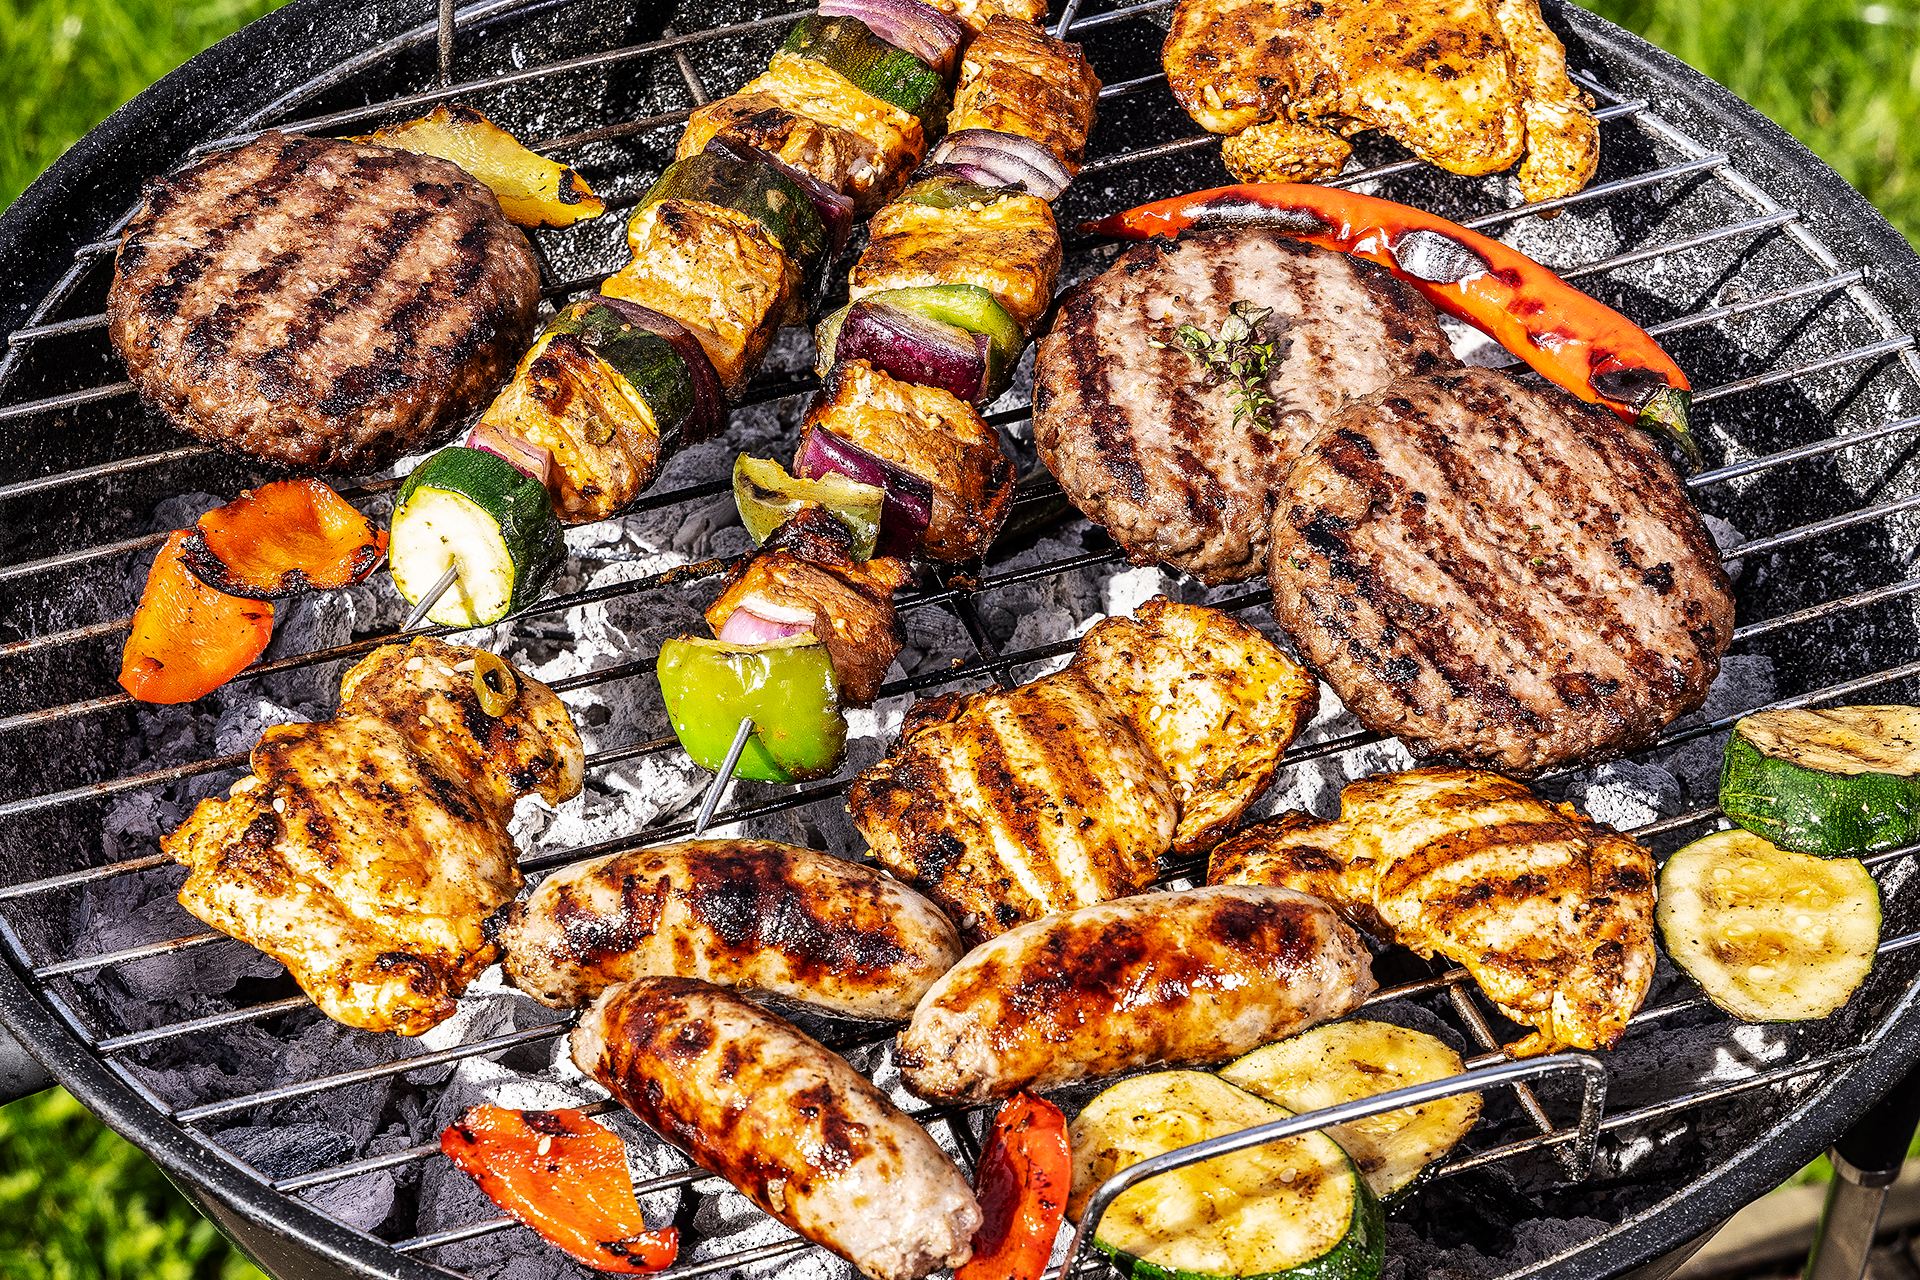 photography of food in a barbecue setting for the modern milkman advertising campaign